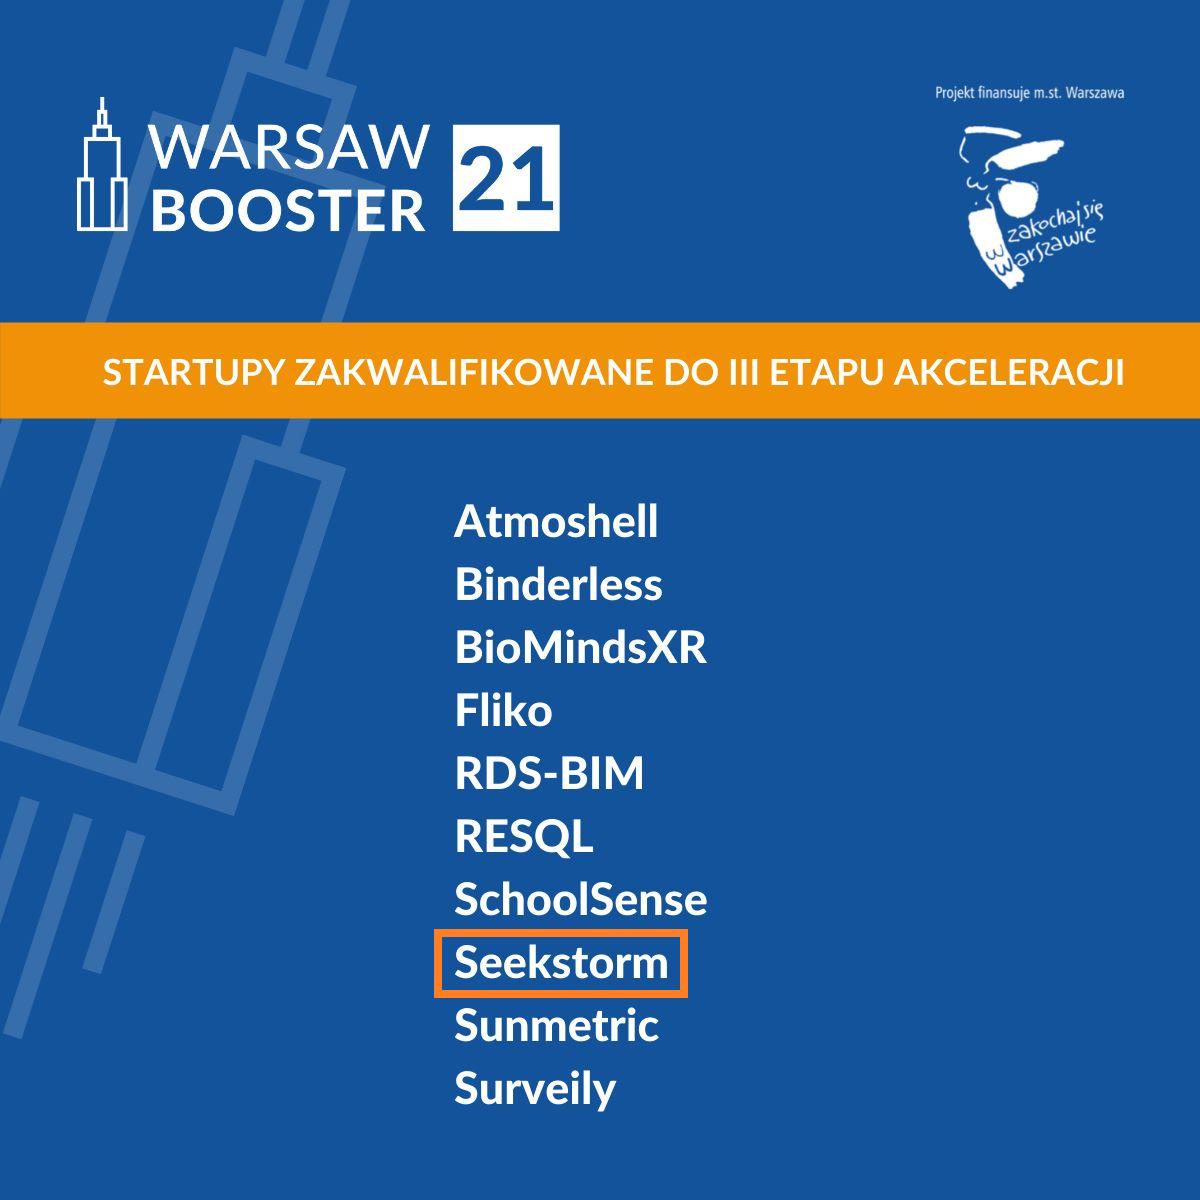 Warsaw Booster 21